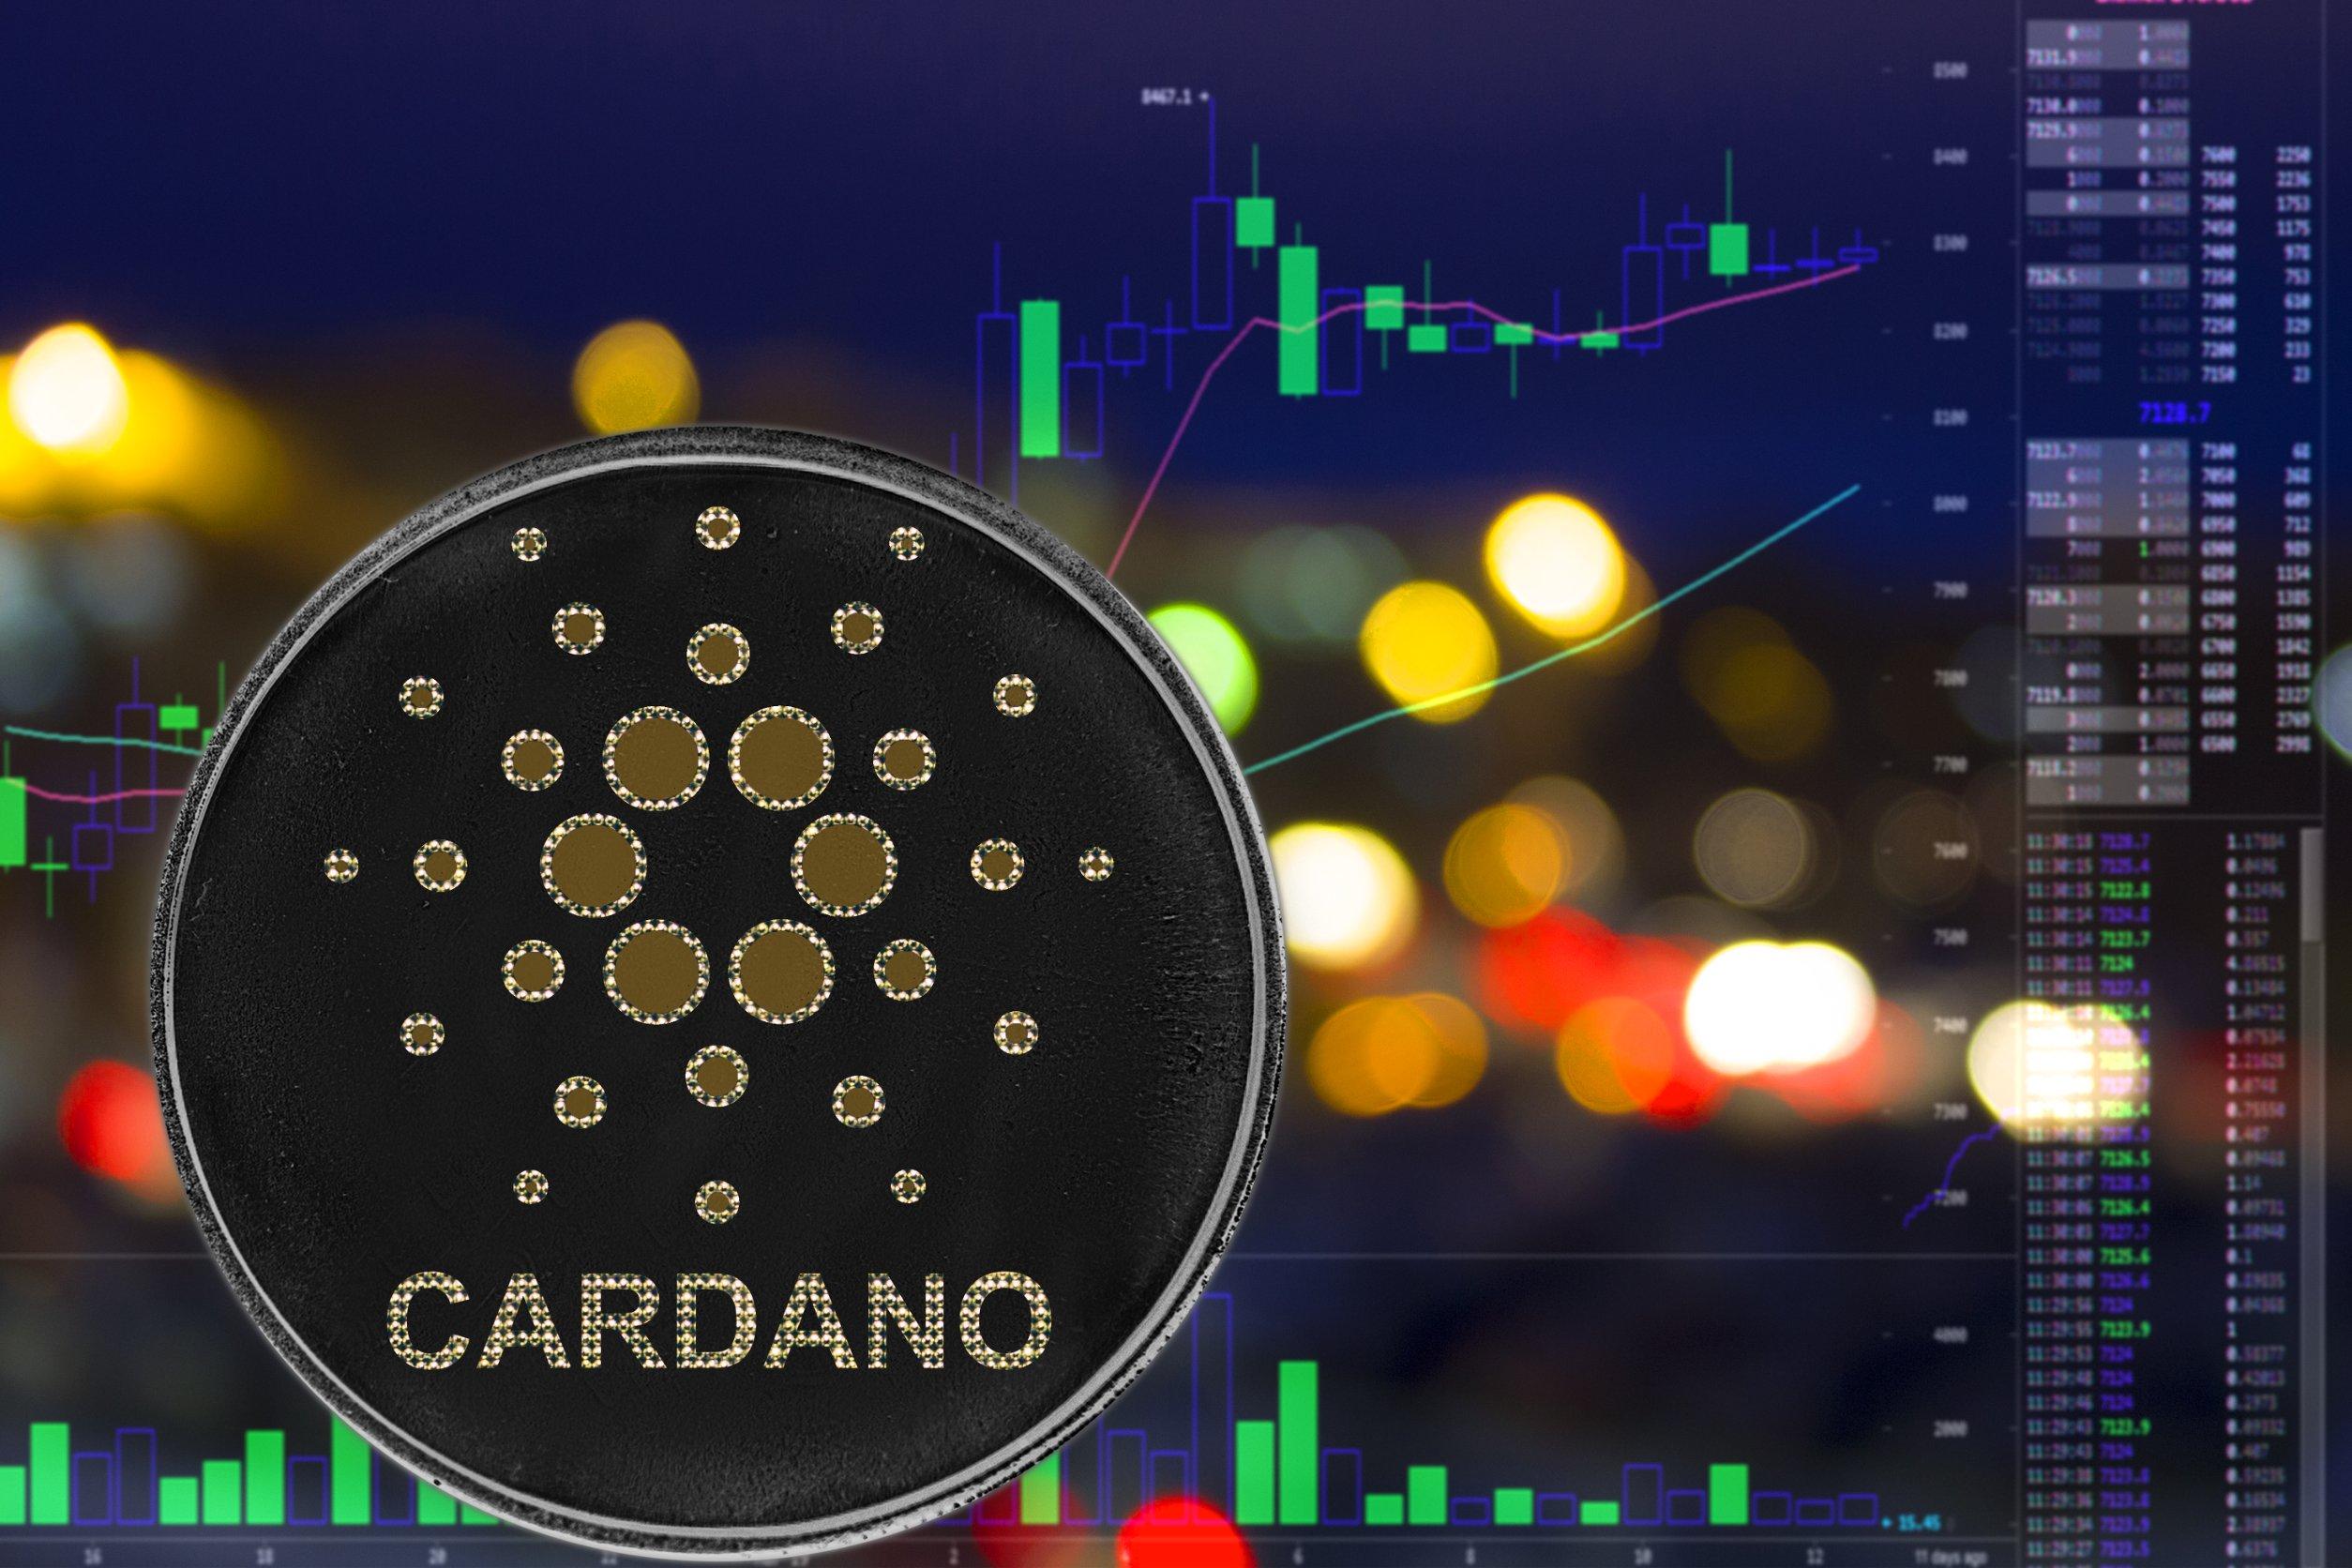 Cardano Price Takes a Nosedive as Fed Remains Hawkish